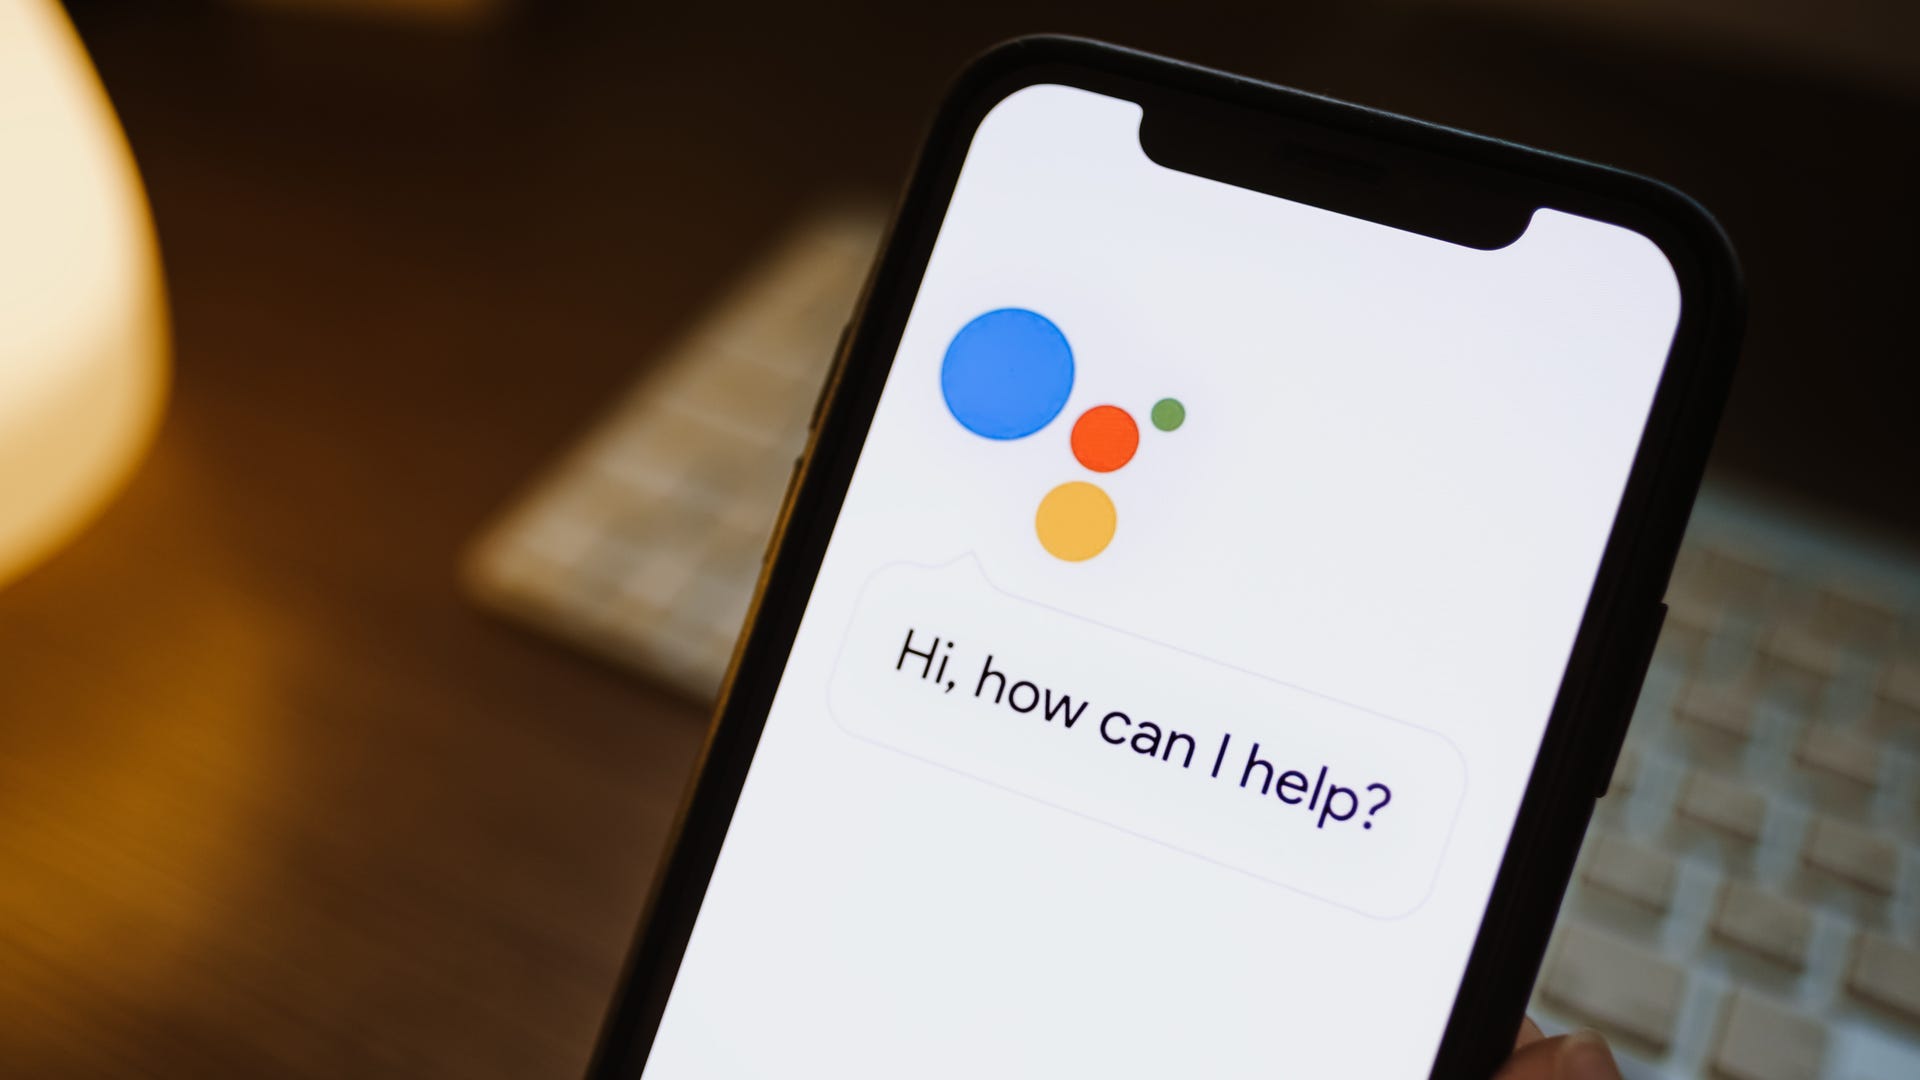 Google Assistant on a smartphone.